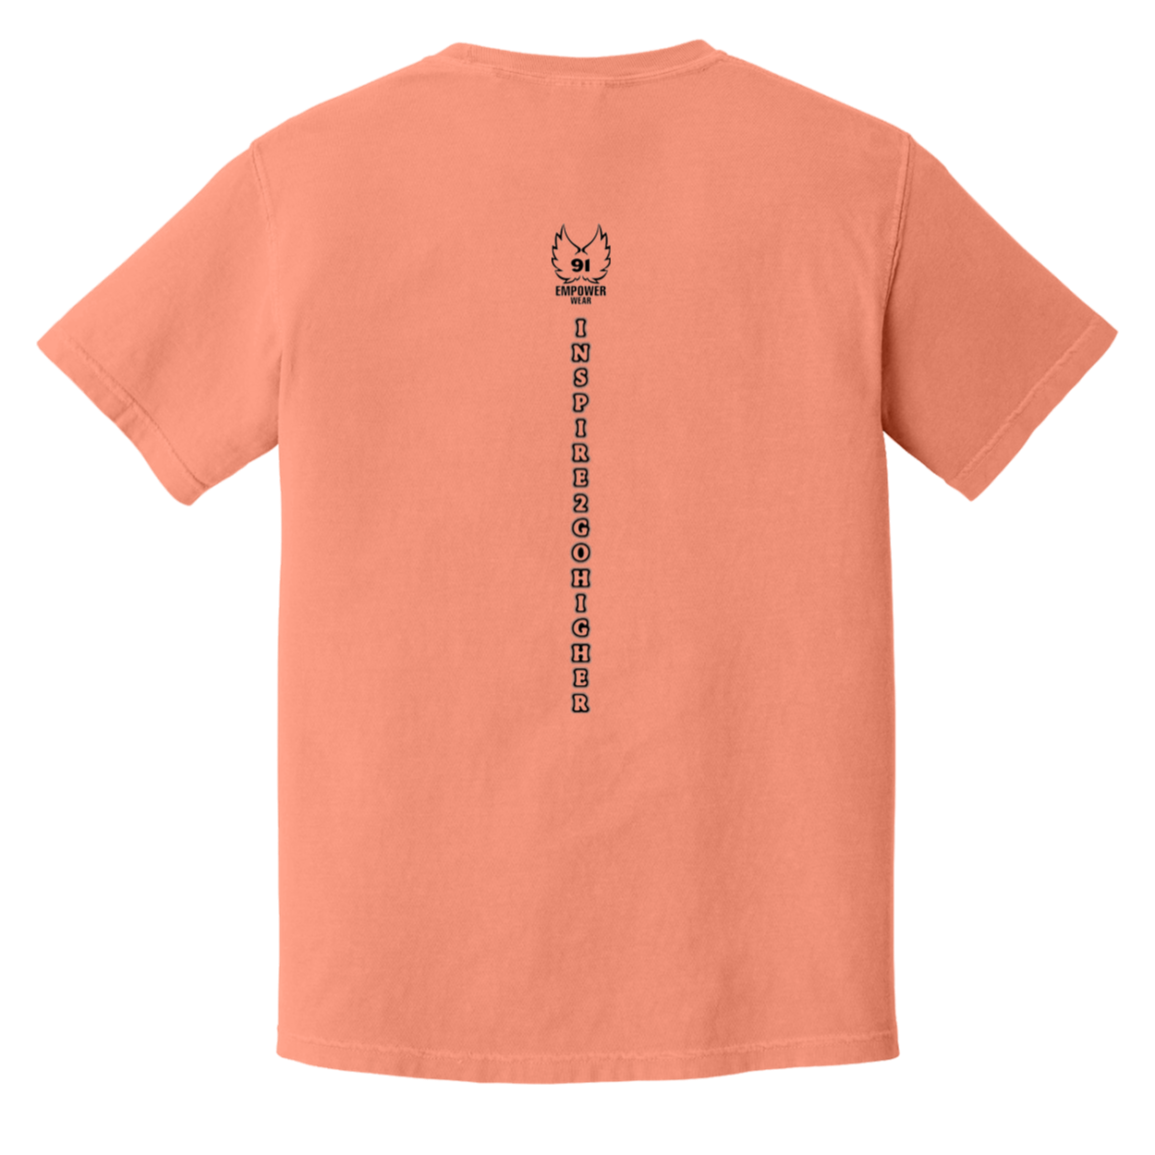 FEAR IS THE ENEMY Heavyweight Garment-Dyed T-Shirt